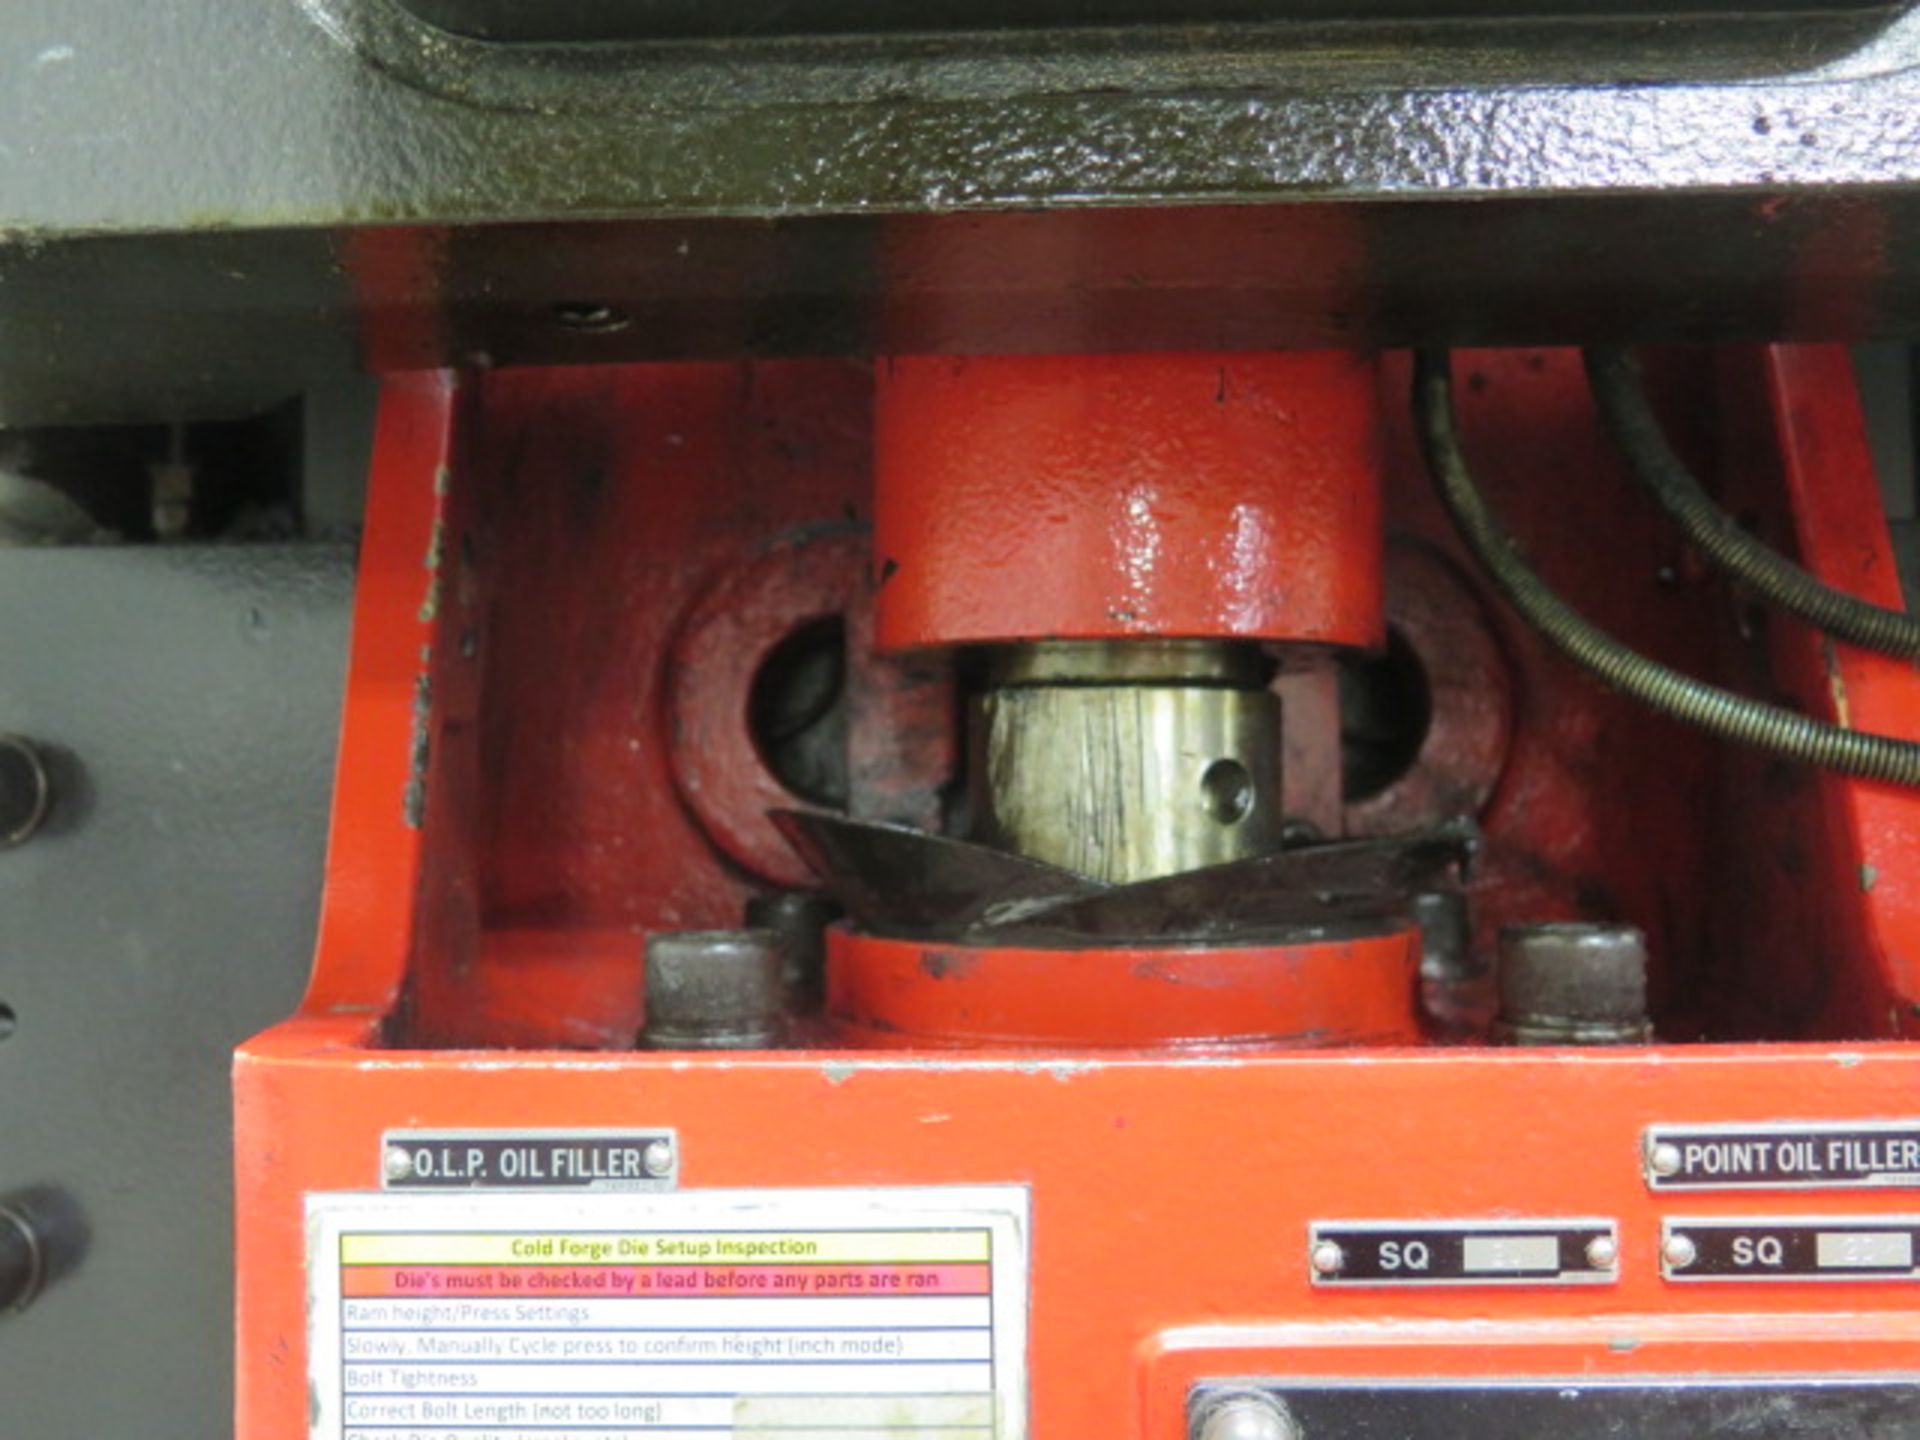 2006 Amada TP45EX 45 Metric Ton (49.5 Short Ton) Hydraulic Press s/n 72100691 SOLD AS IS - Image 9 of 14